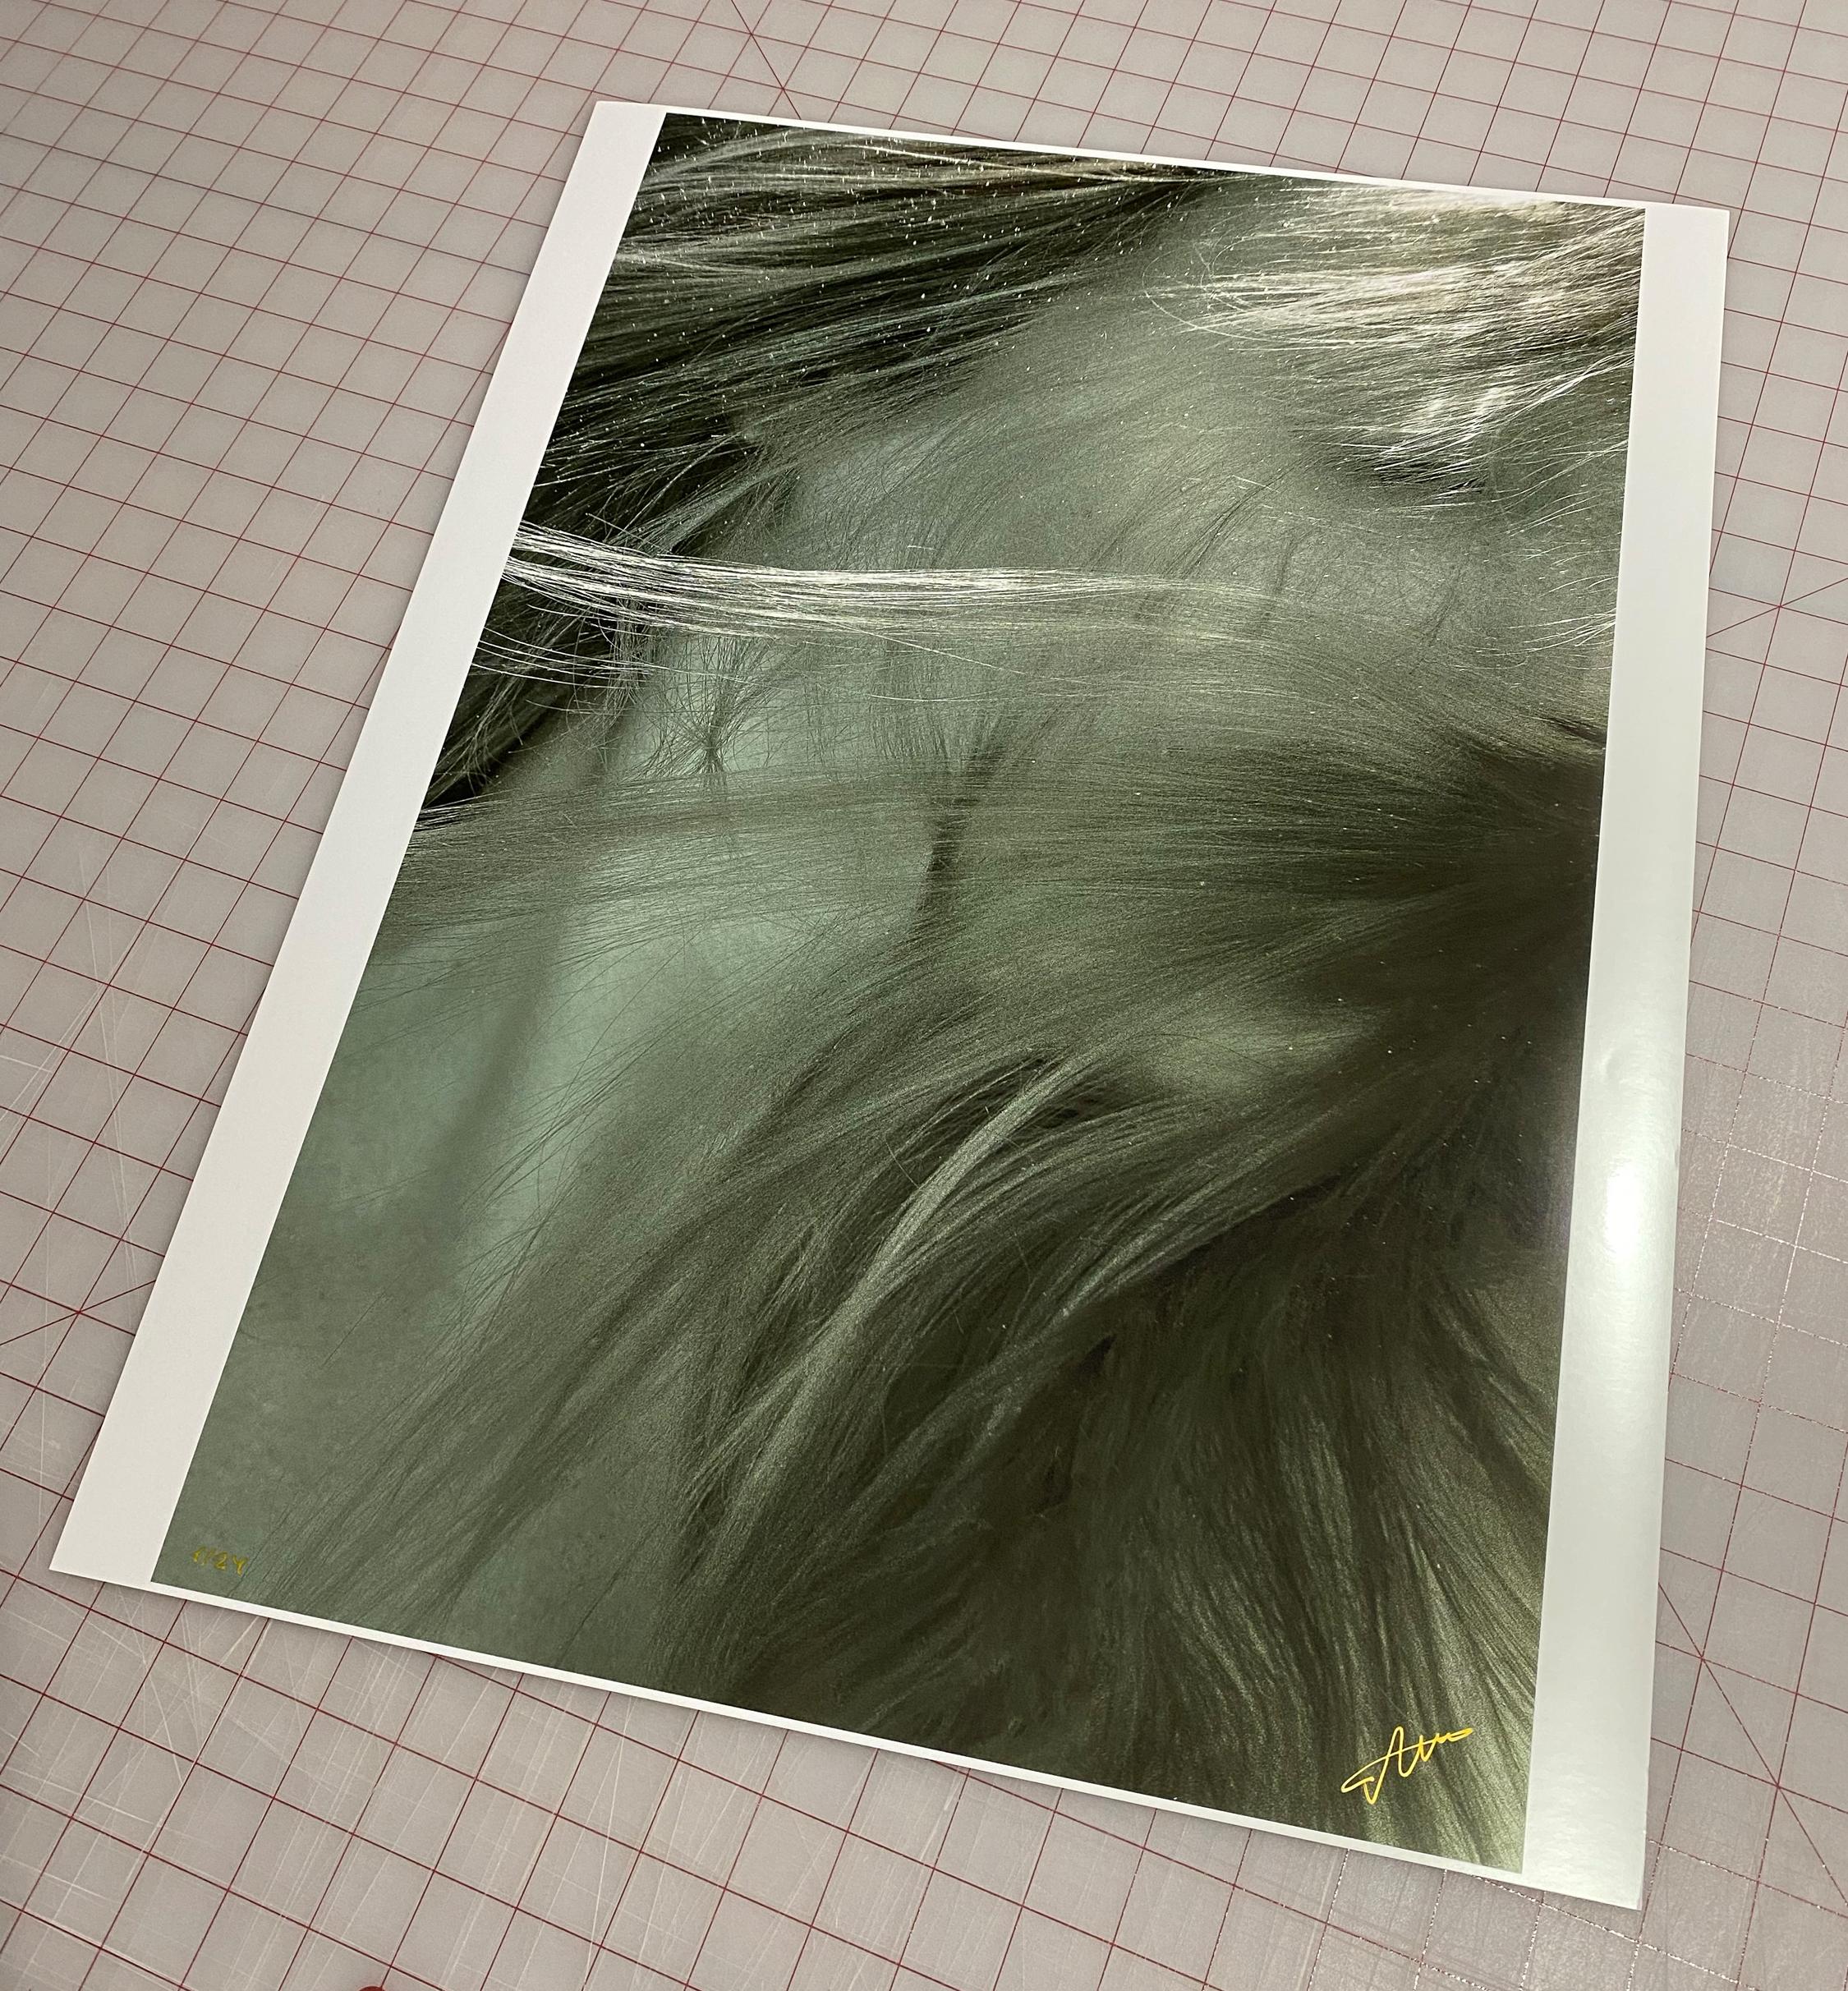 The Angel Hair - underwater photograph - print on paper 18” x 24” - Contemporary Photograph by Alex Sher